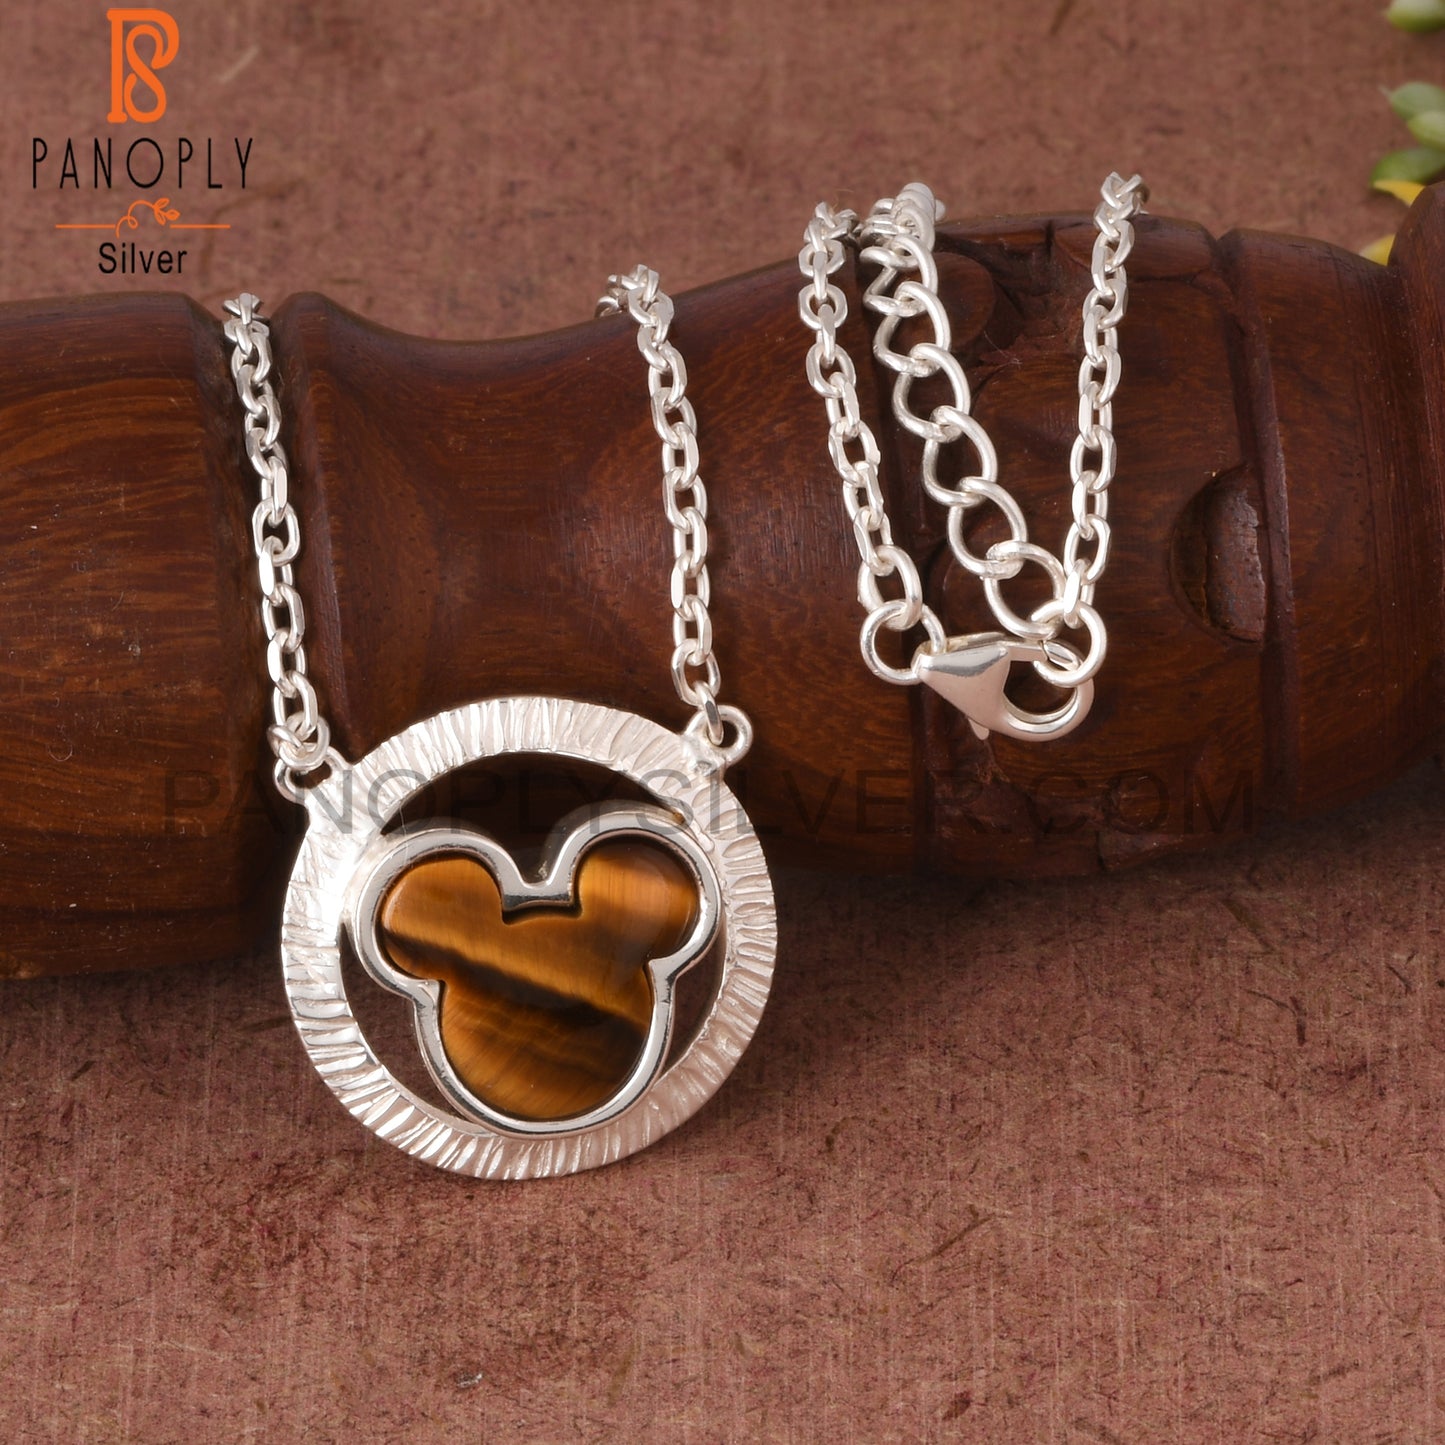 Tiger Eye Yellow Mickey Mouse in Circle 925 Silver Pendant